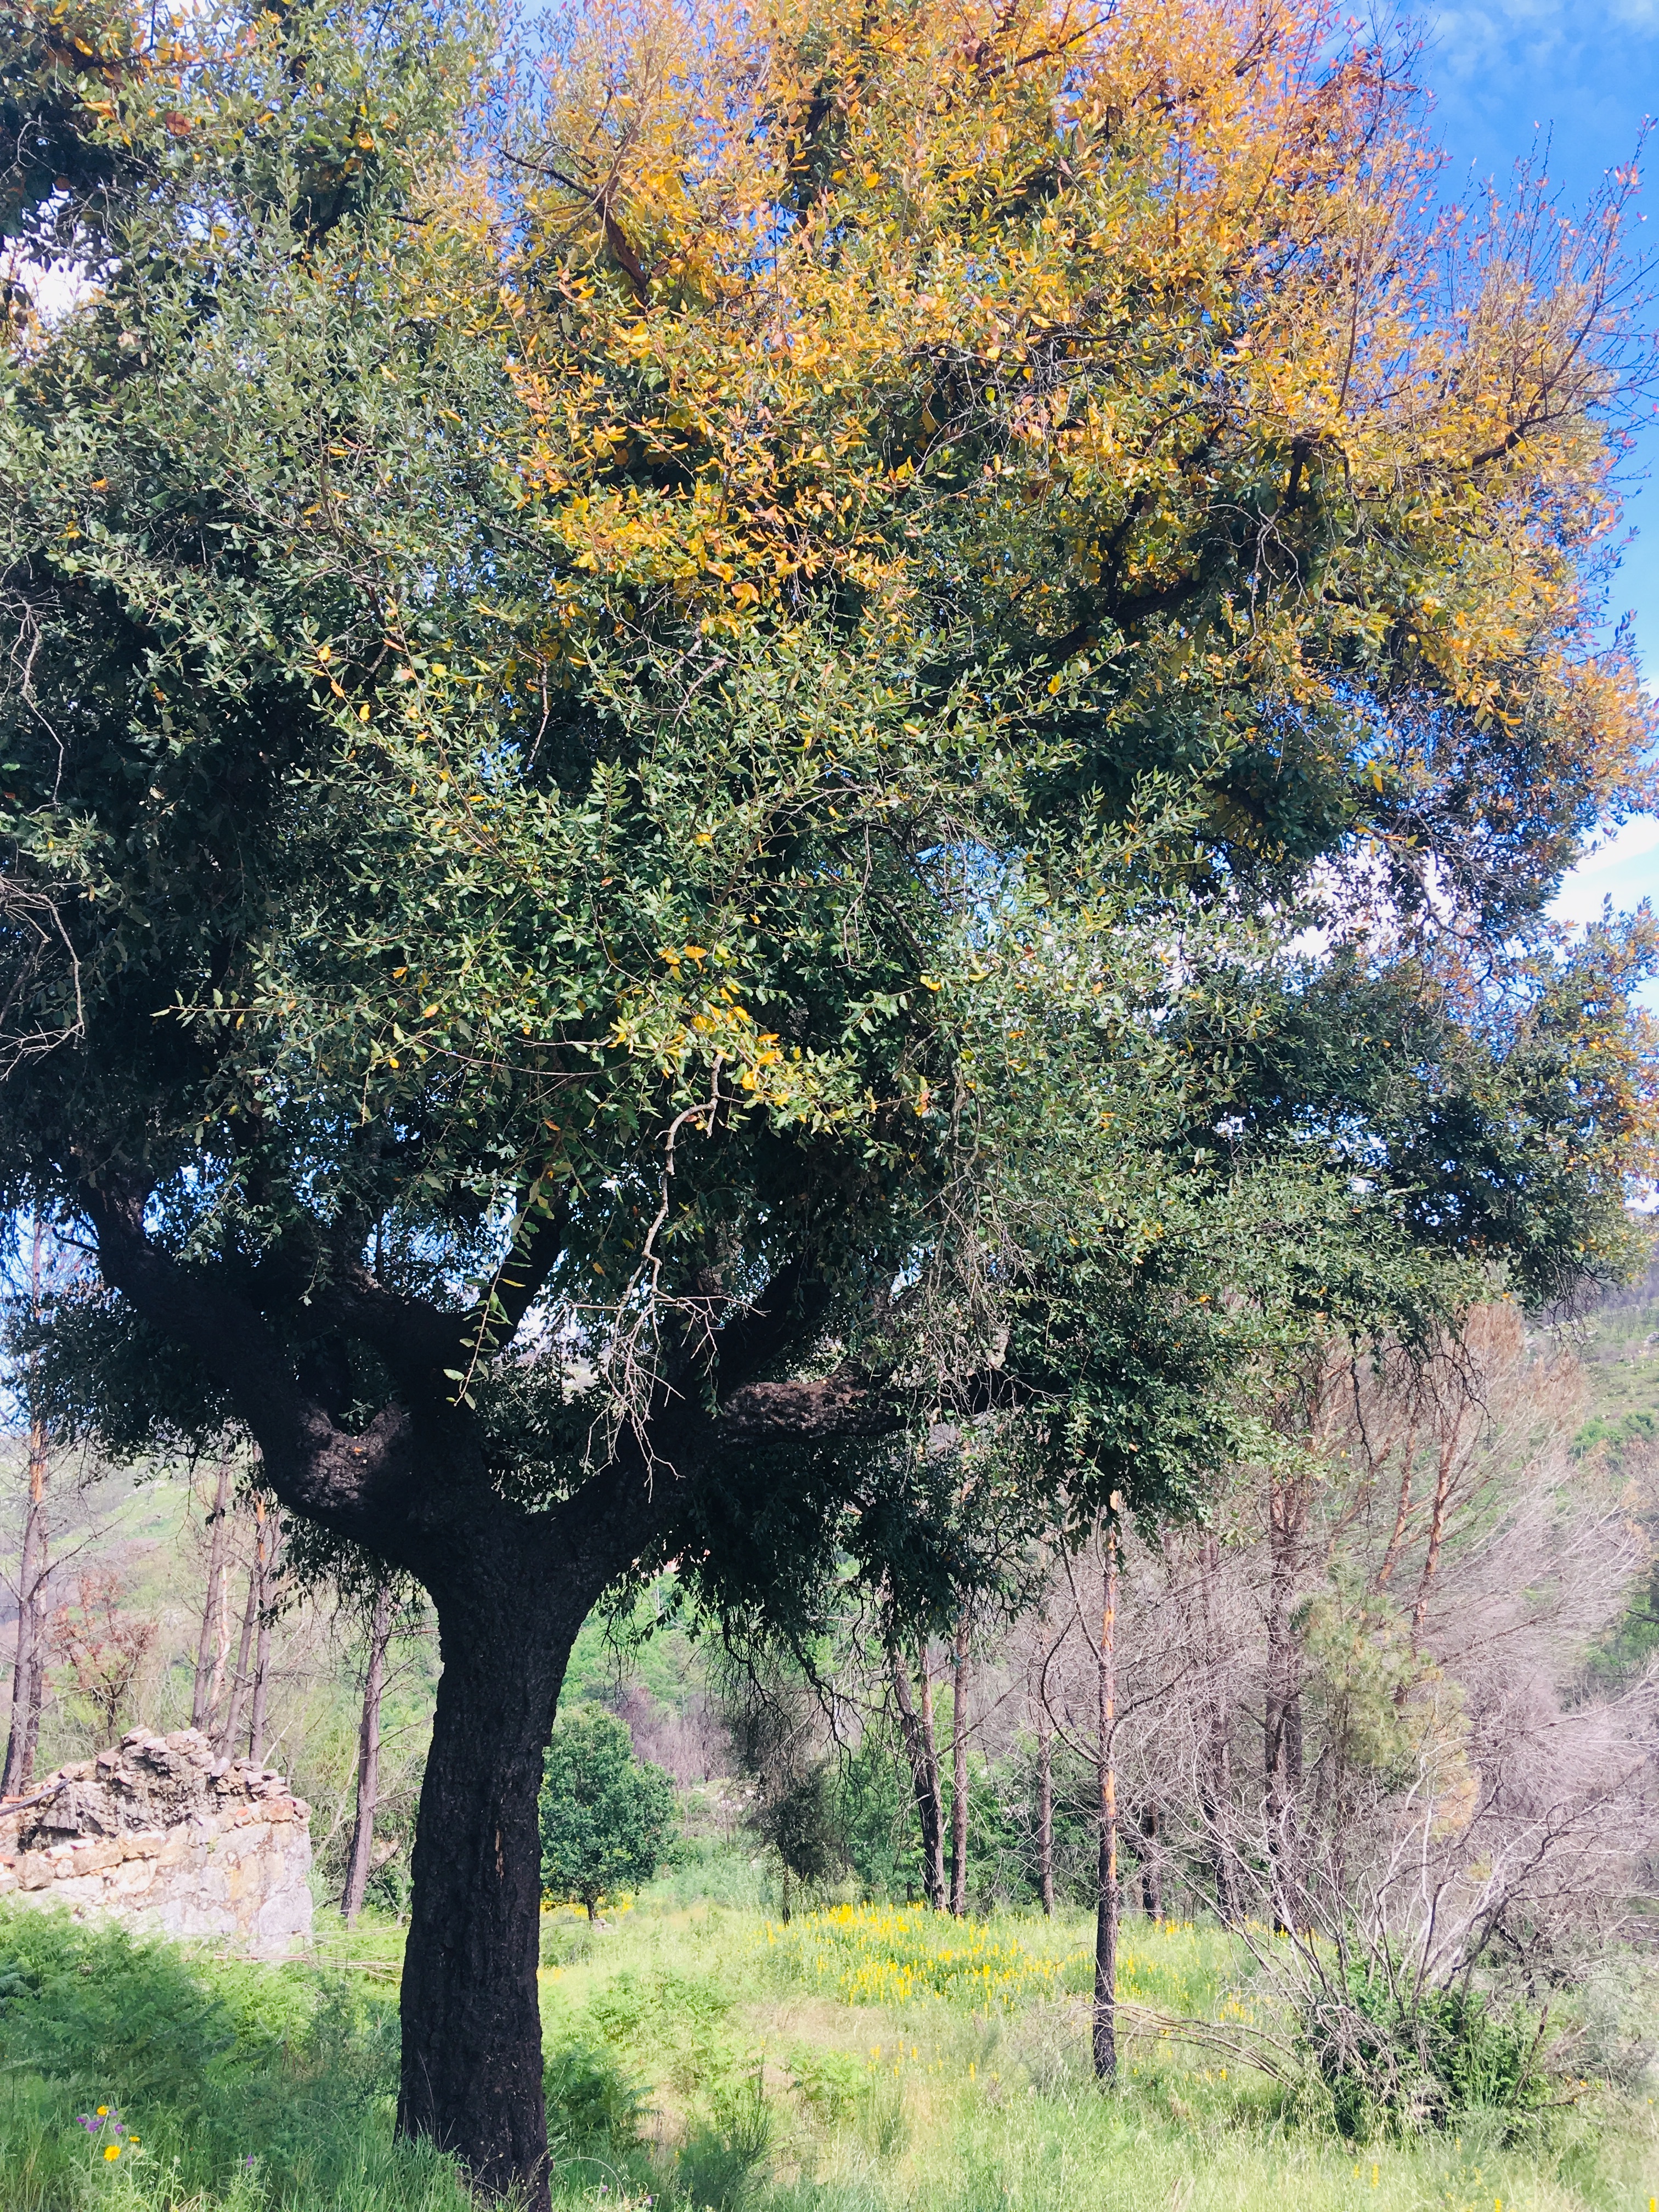 Cork Oak, well adapted to wild fires